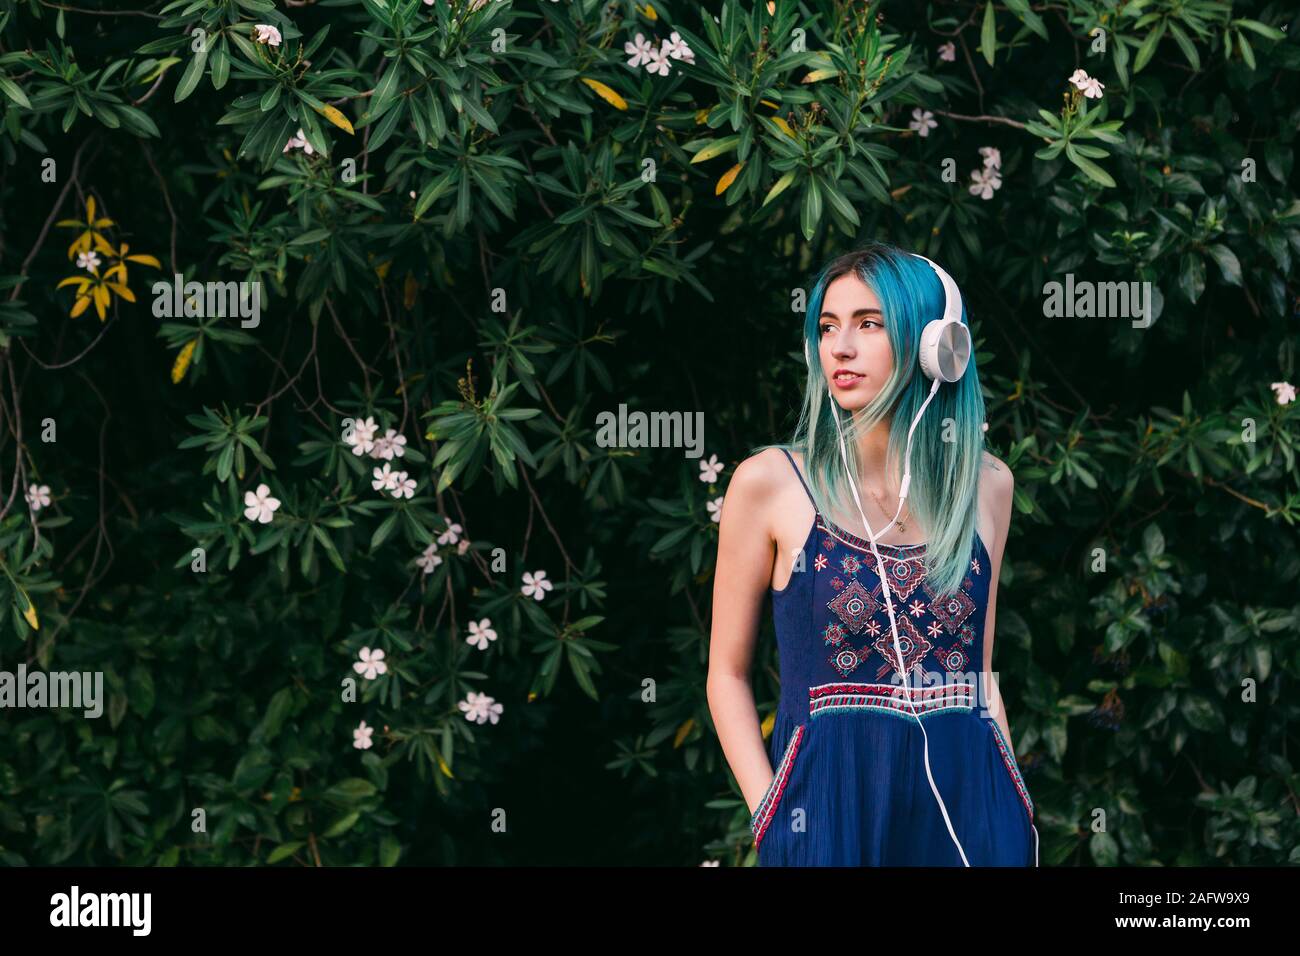 Young woman with blue hair listening to music with headphones in front of flowering tree Stock Photo